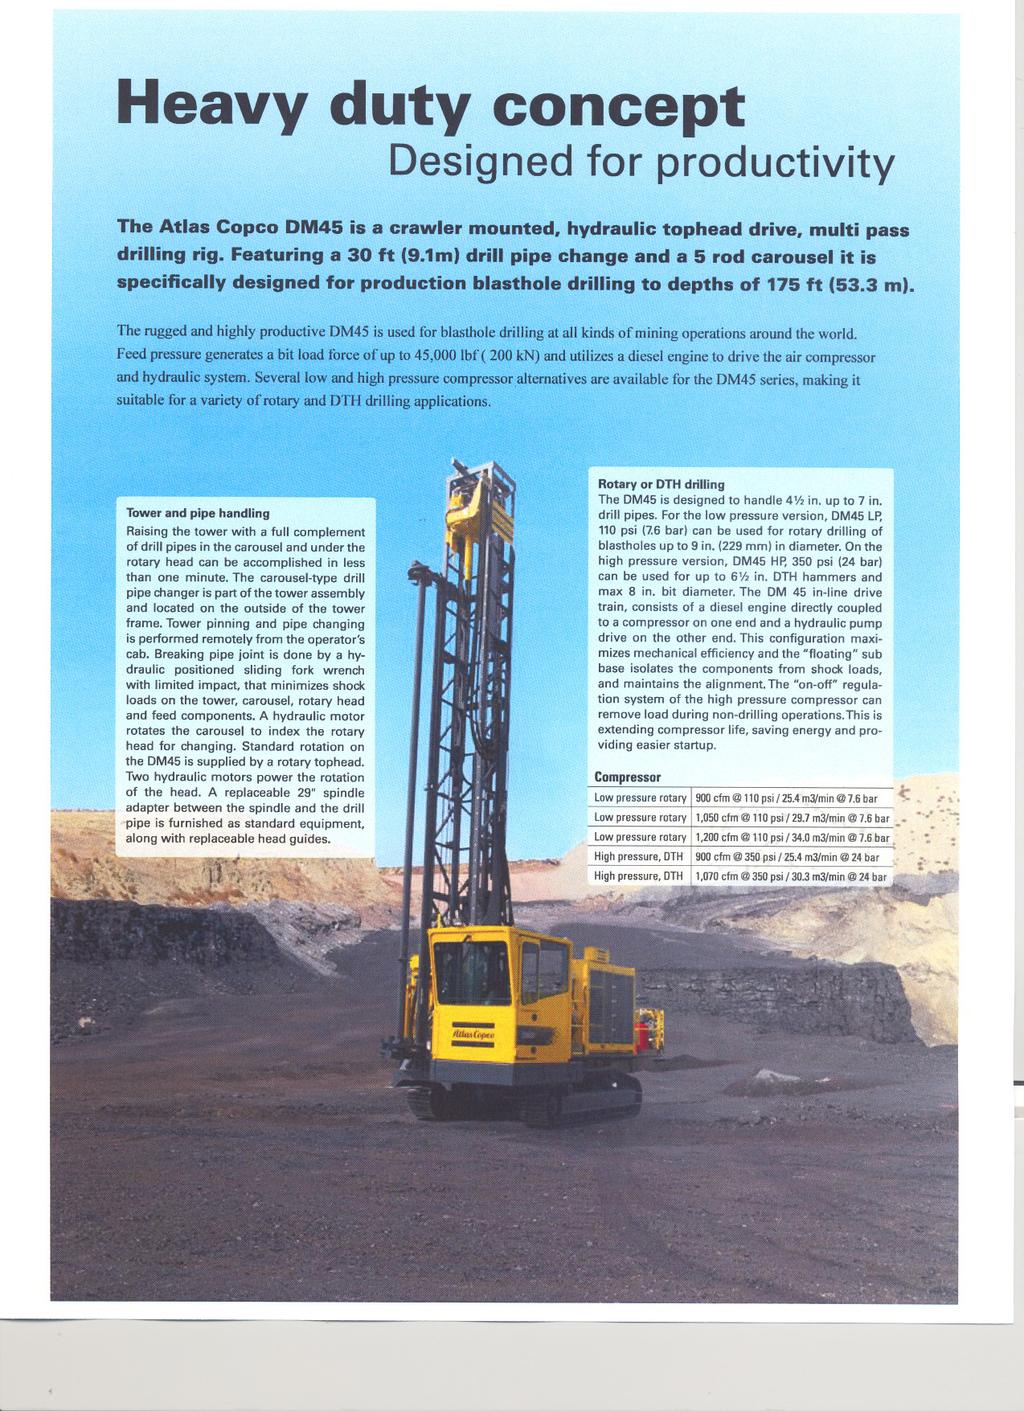 Heavy duty concept Designed for productivity The Atlas Copco DM45 is a crawler mounted, hydraulic tophead drive, multi pass drilling rig Featuring a 30 ft (91m) drill pipe change and a 5 rod carousel